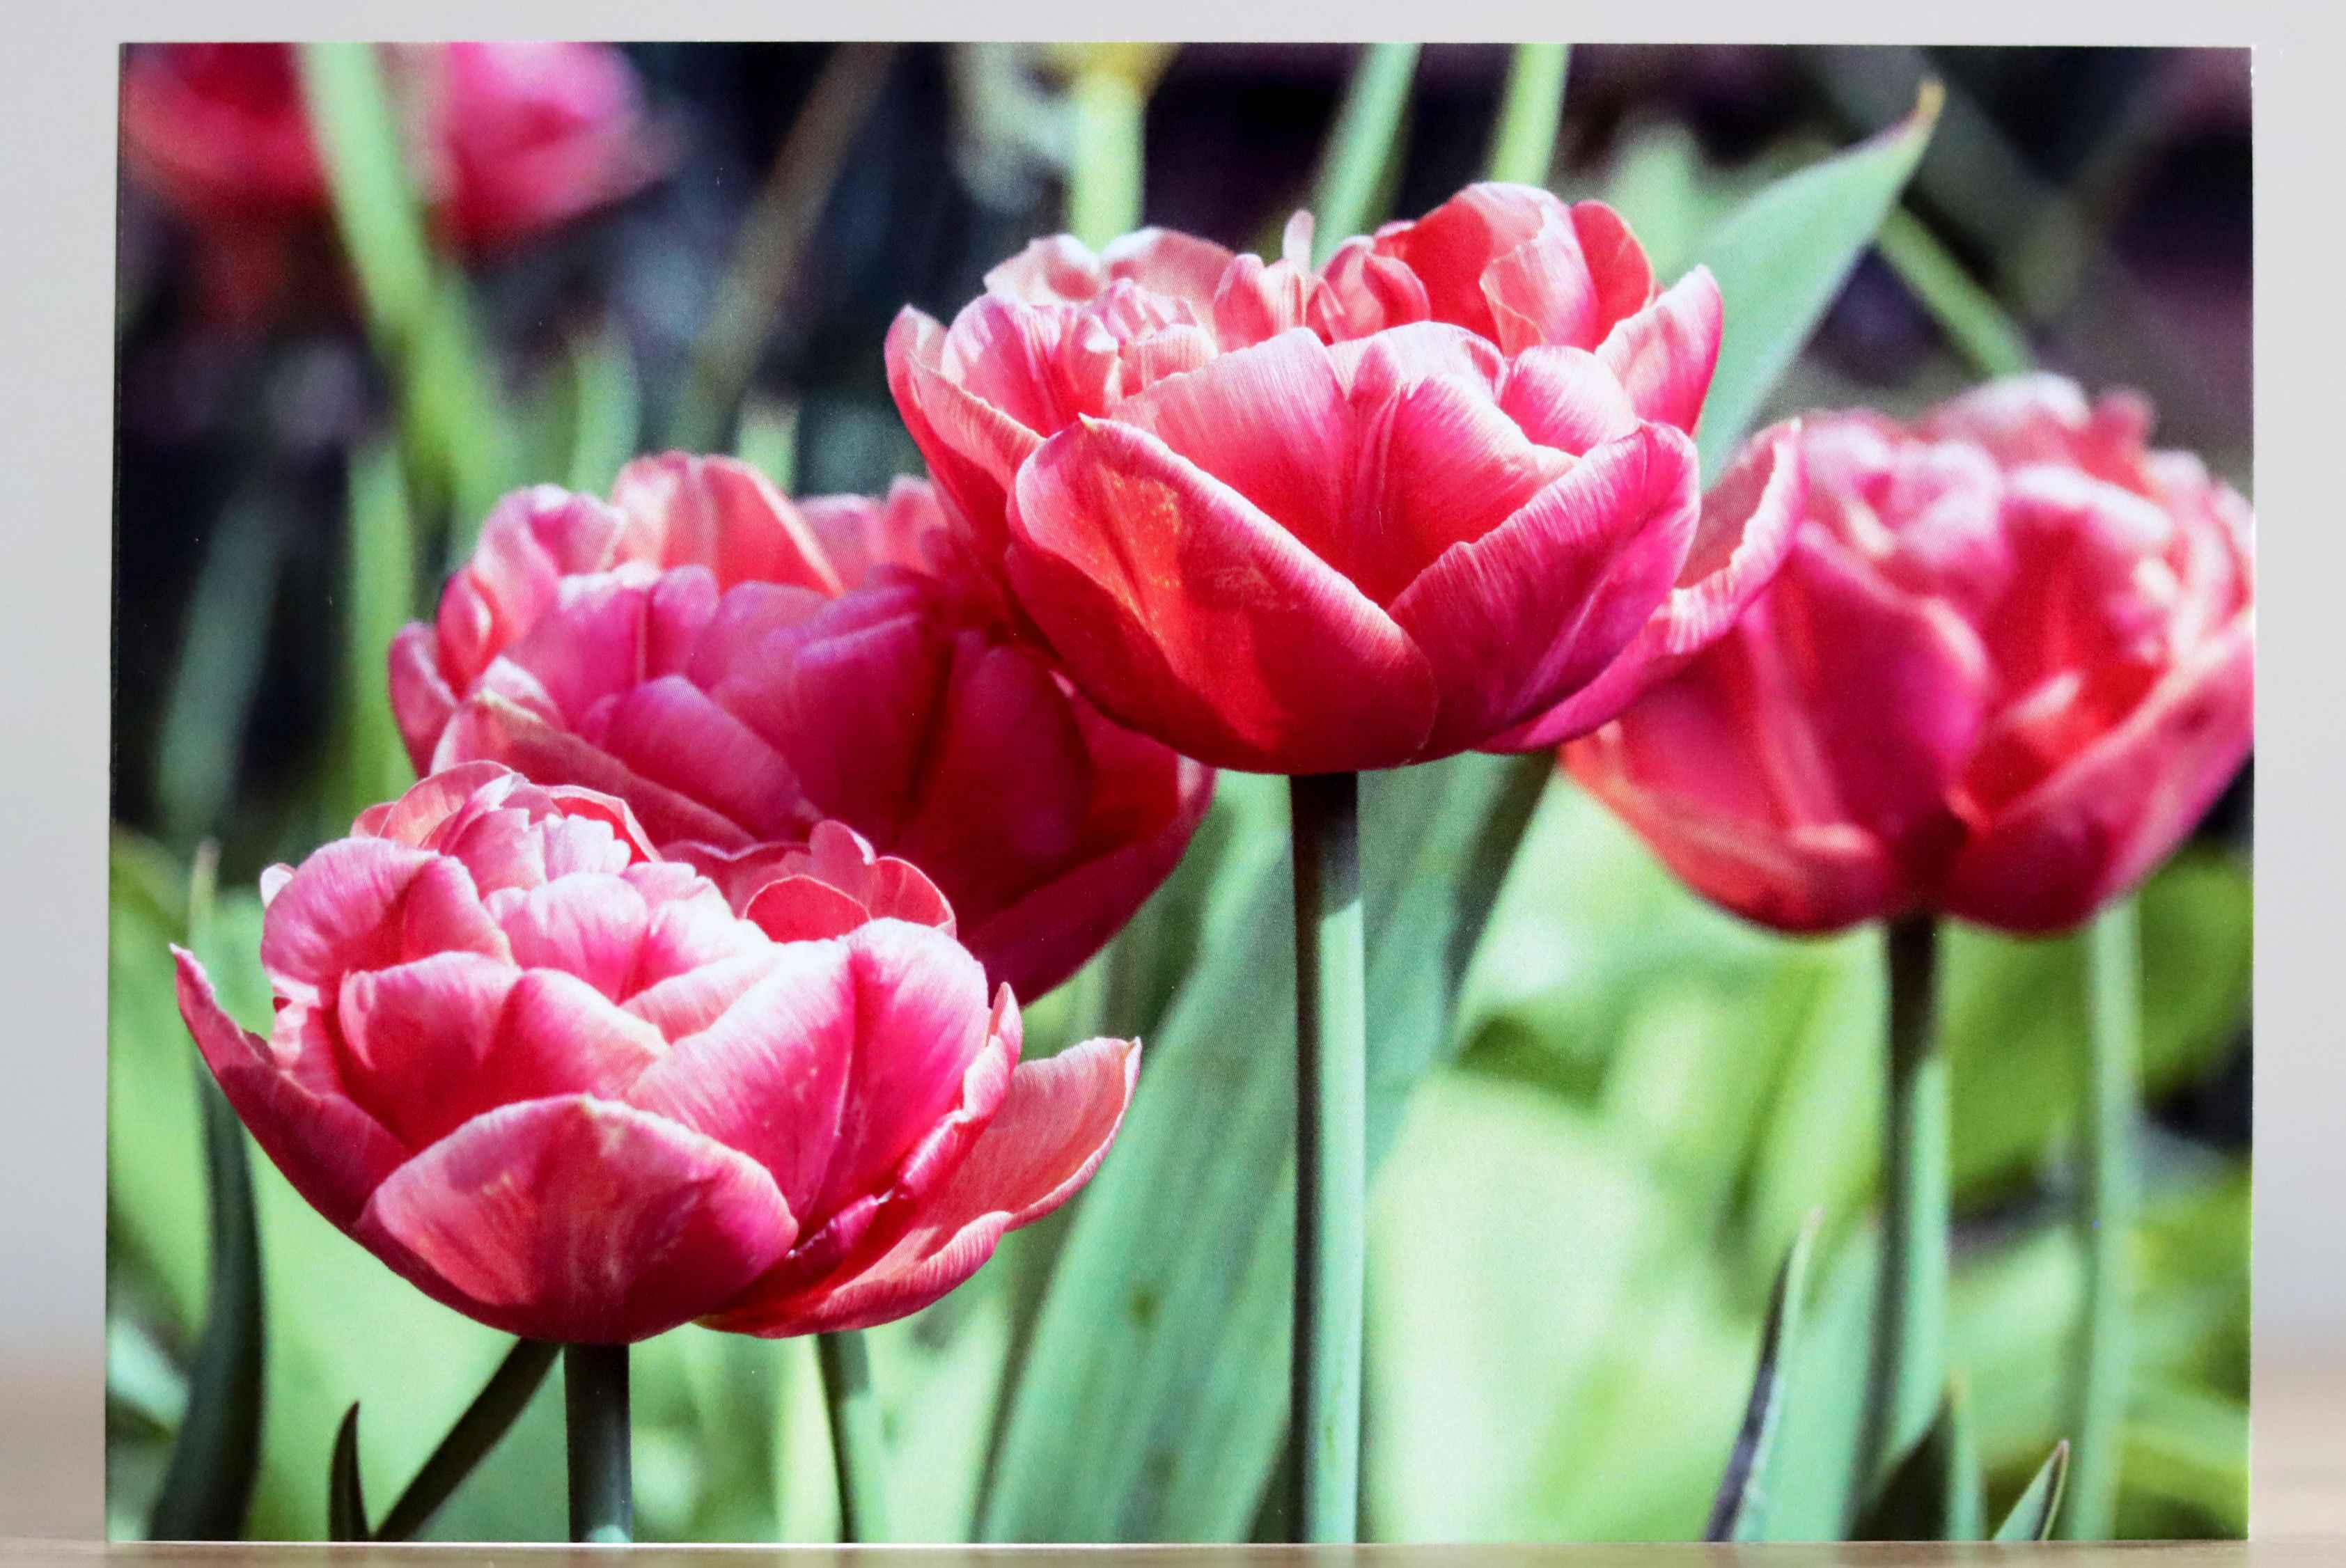 Four Tulips- Photographic Greeting Card